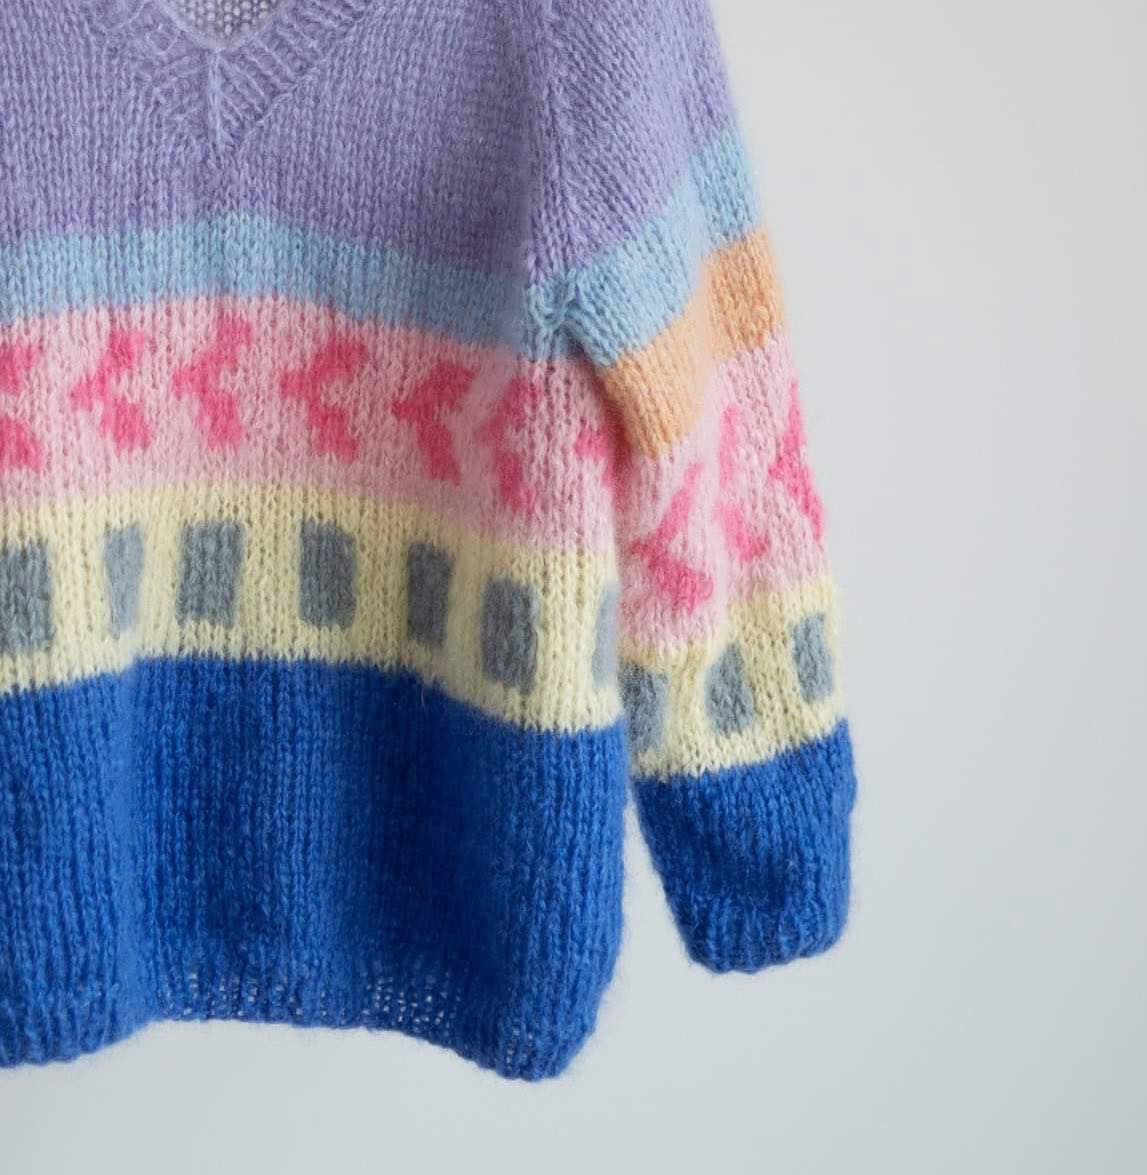  - Candyfloss 80s sweater | 80s knit | Knitting pattern - by HipKnitShop - 29/08/2020